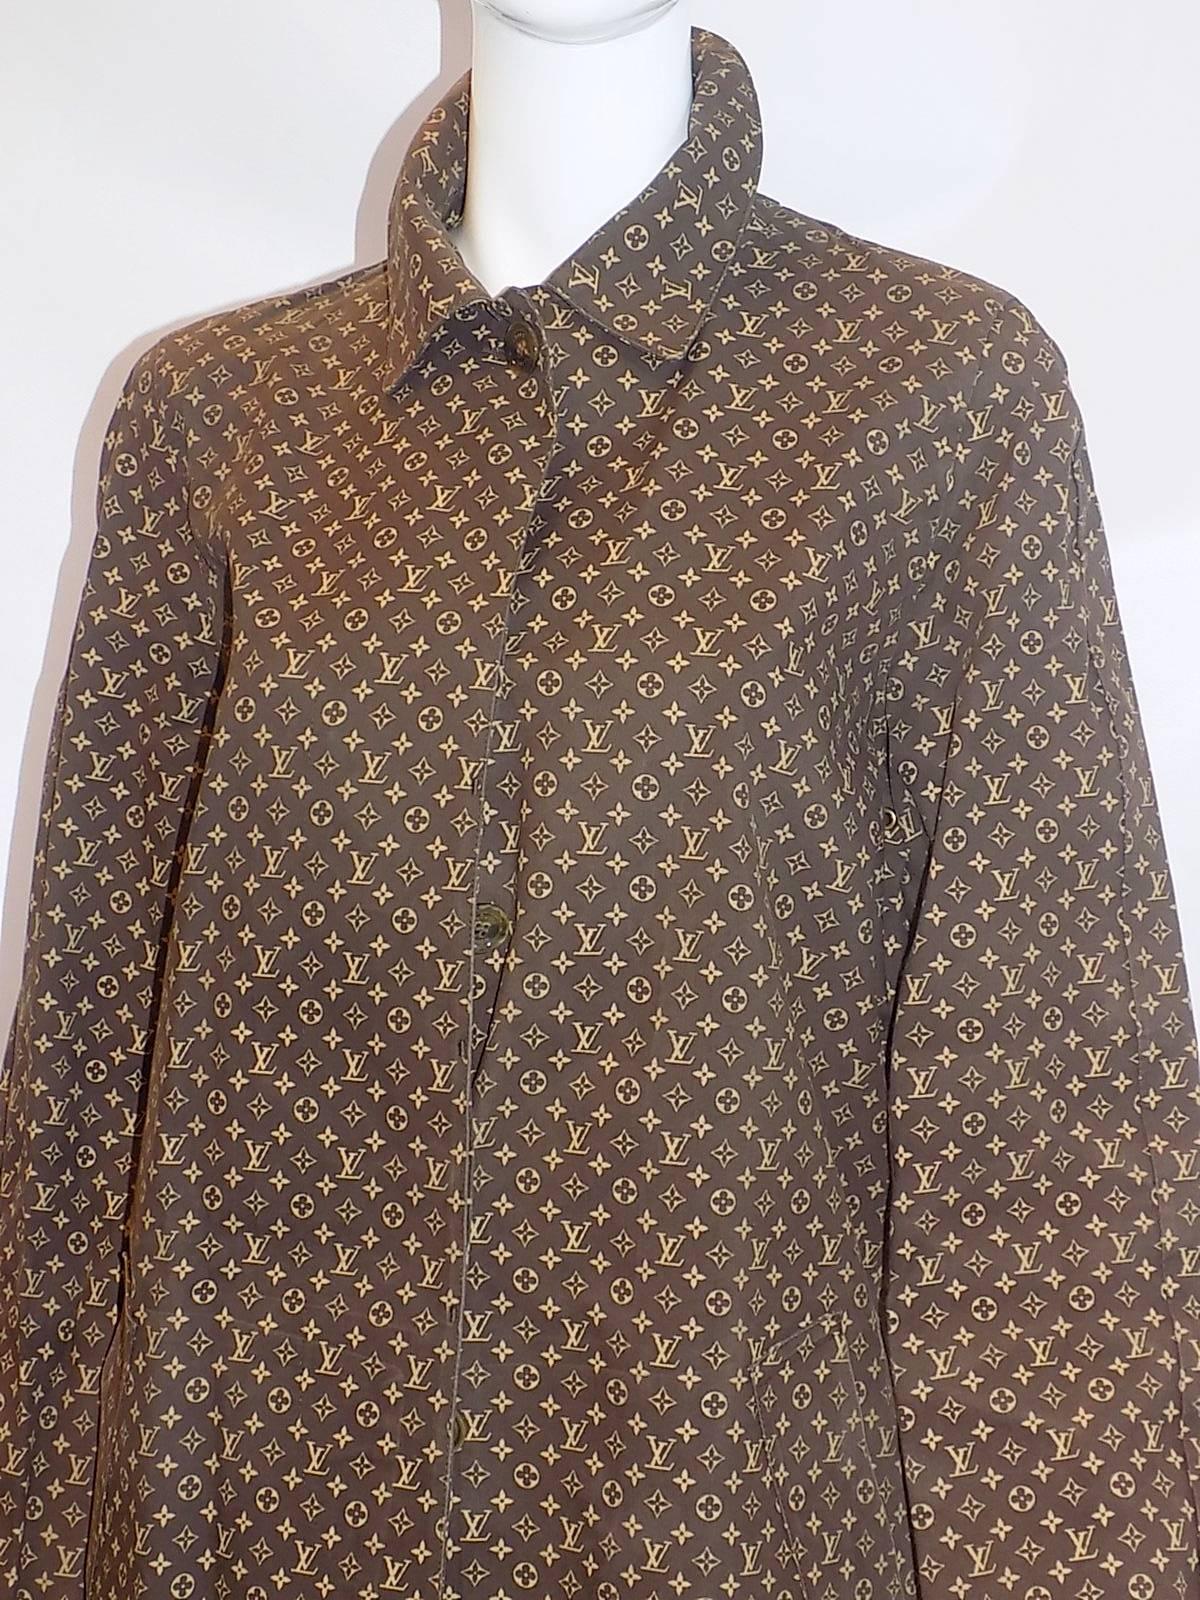 Pristine condition like new! 100% cotton rubber proffed Louis Vuitton mini monogram Mackintosh Rain coat .  Front concealed logo engraved buttons. Side pockets. Back  vent.  Size medium. Shipped in original garment bag. 
Measures :
Shoulders